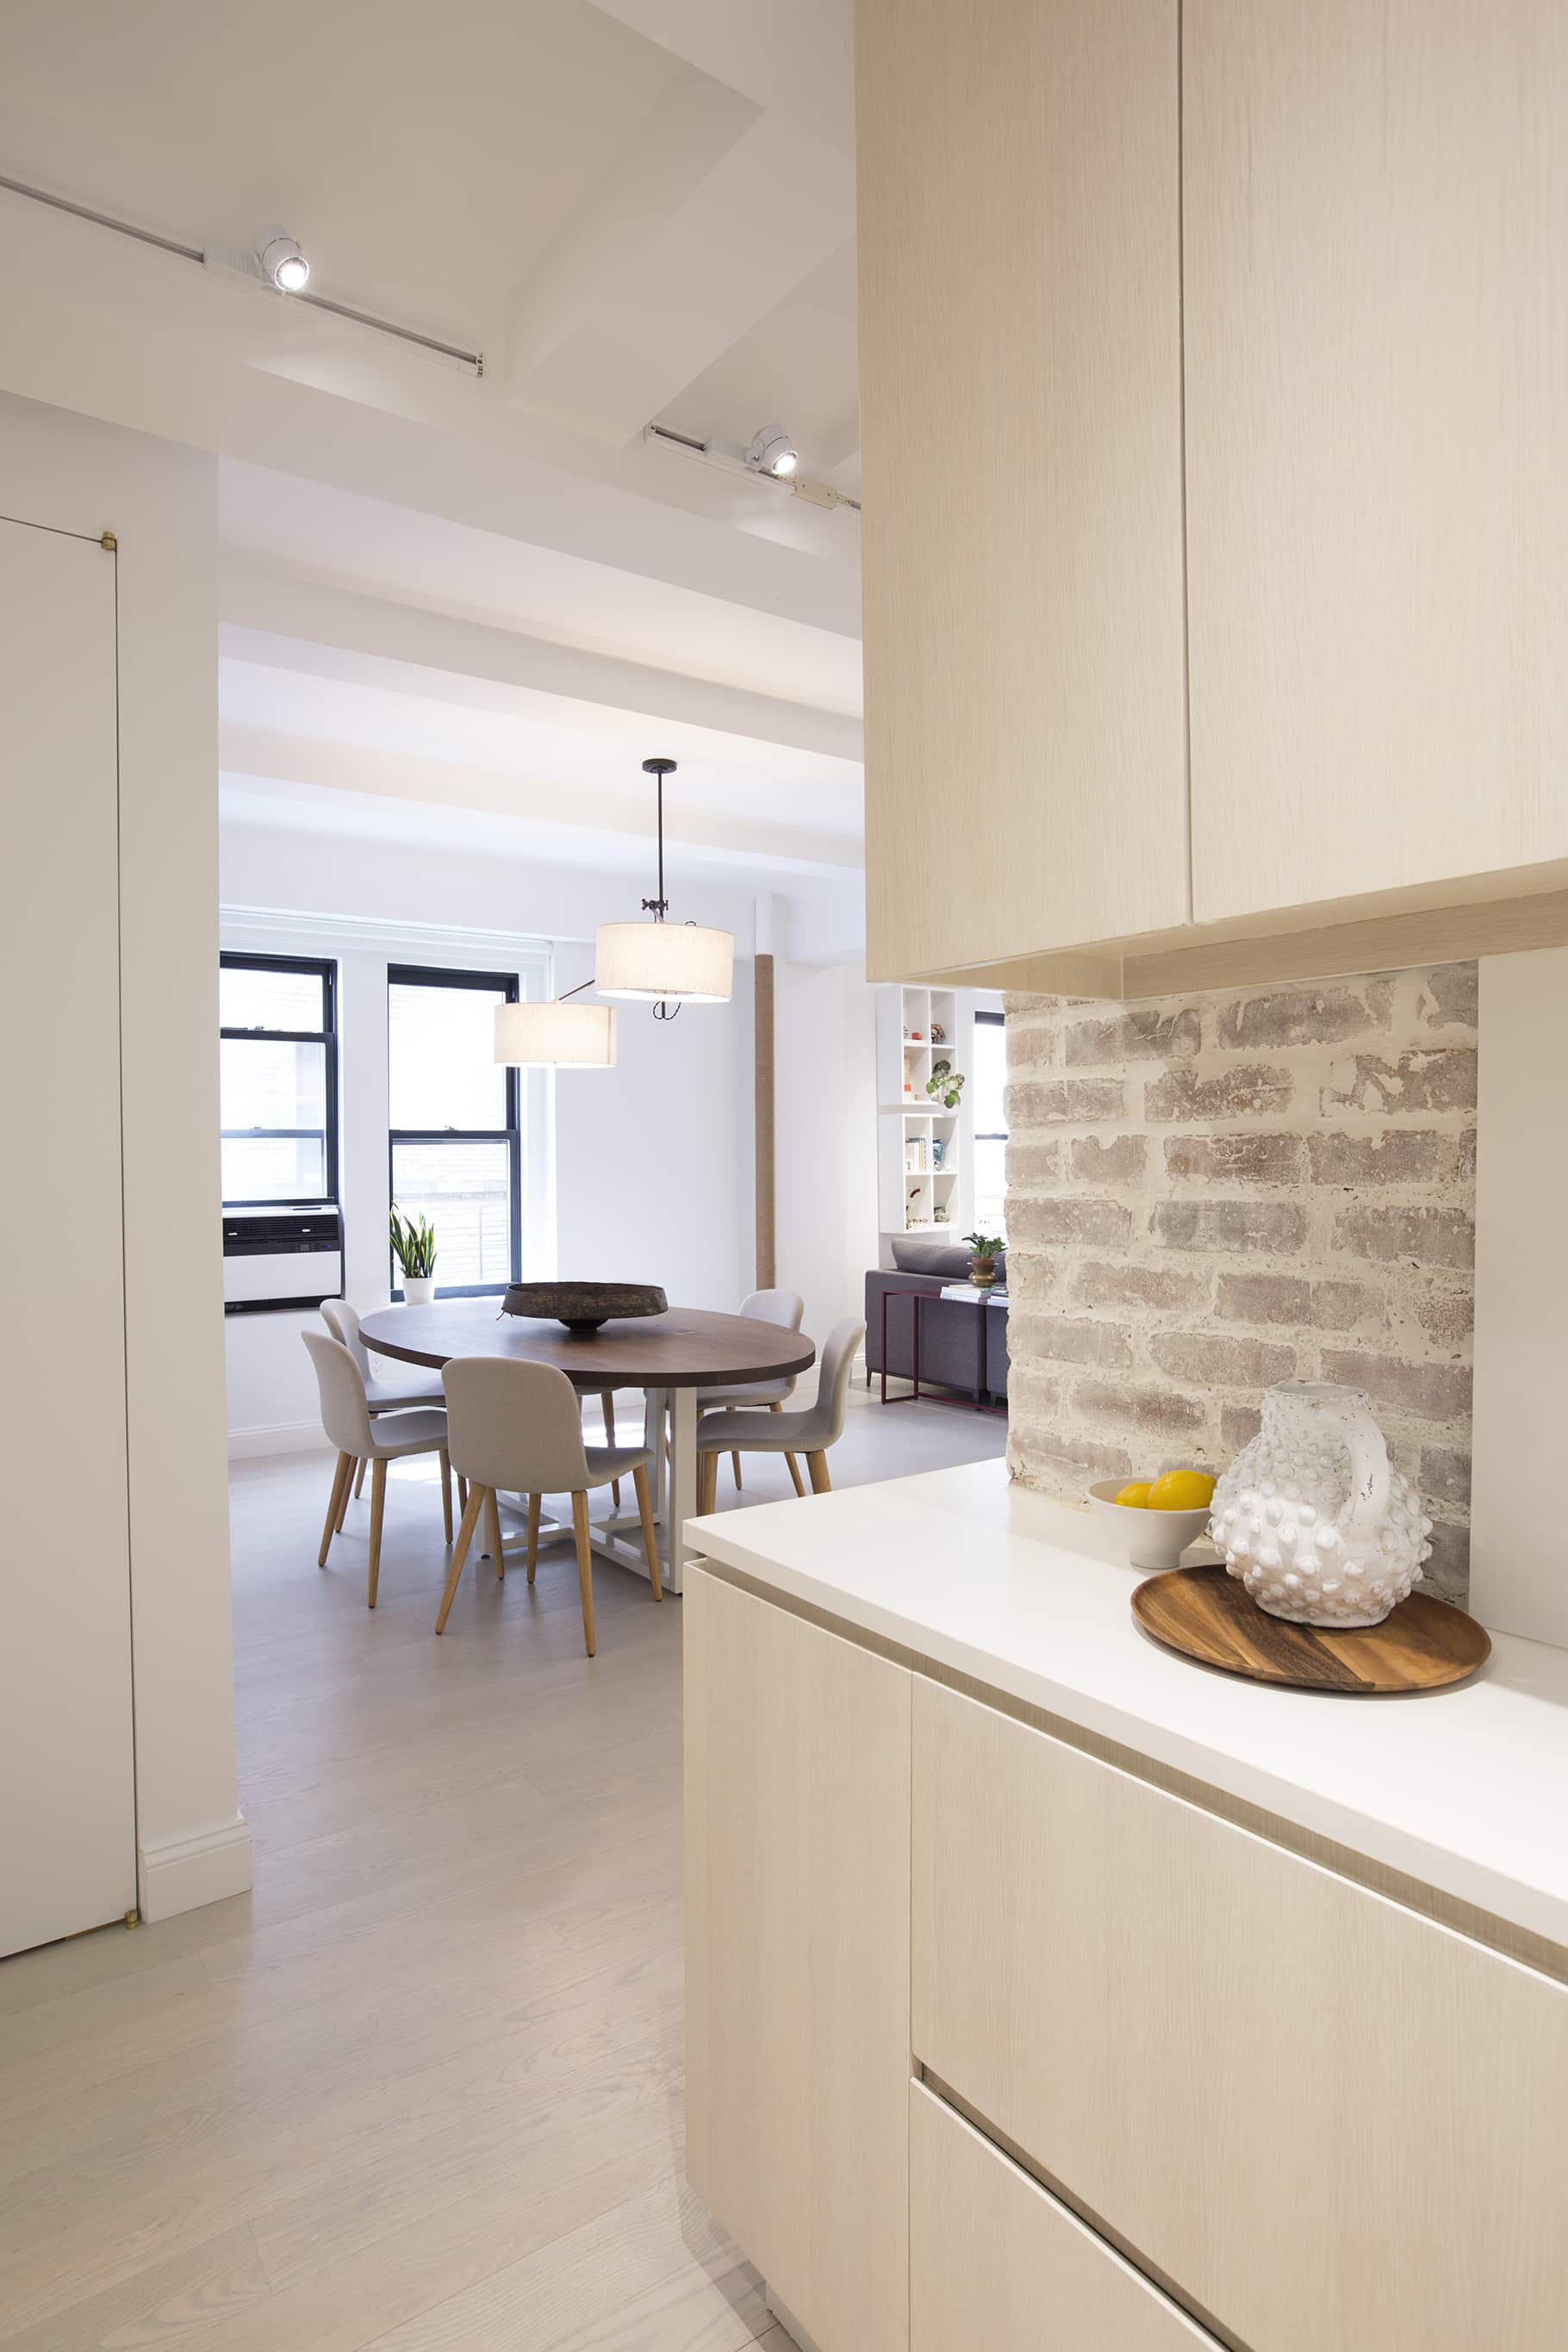 NYC Architect Architecture Renovate Renovation Residential Upper West Side Apartment Co-op Modern Pre-War Existing Details Exposed Brick Kitchen